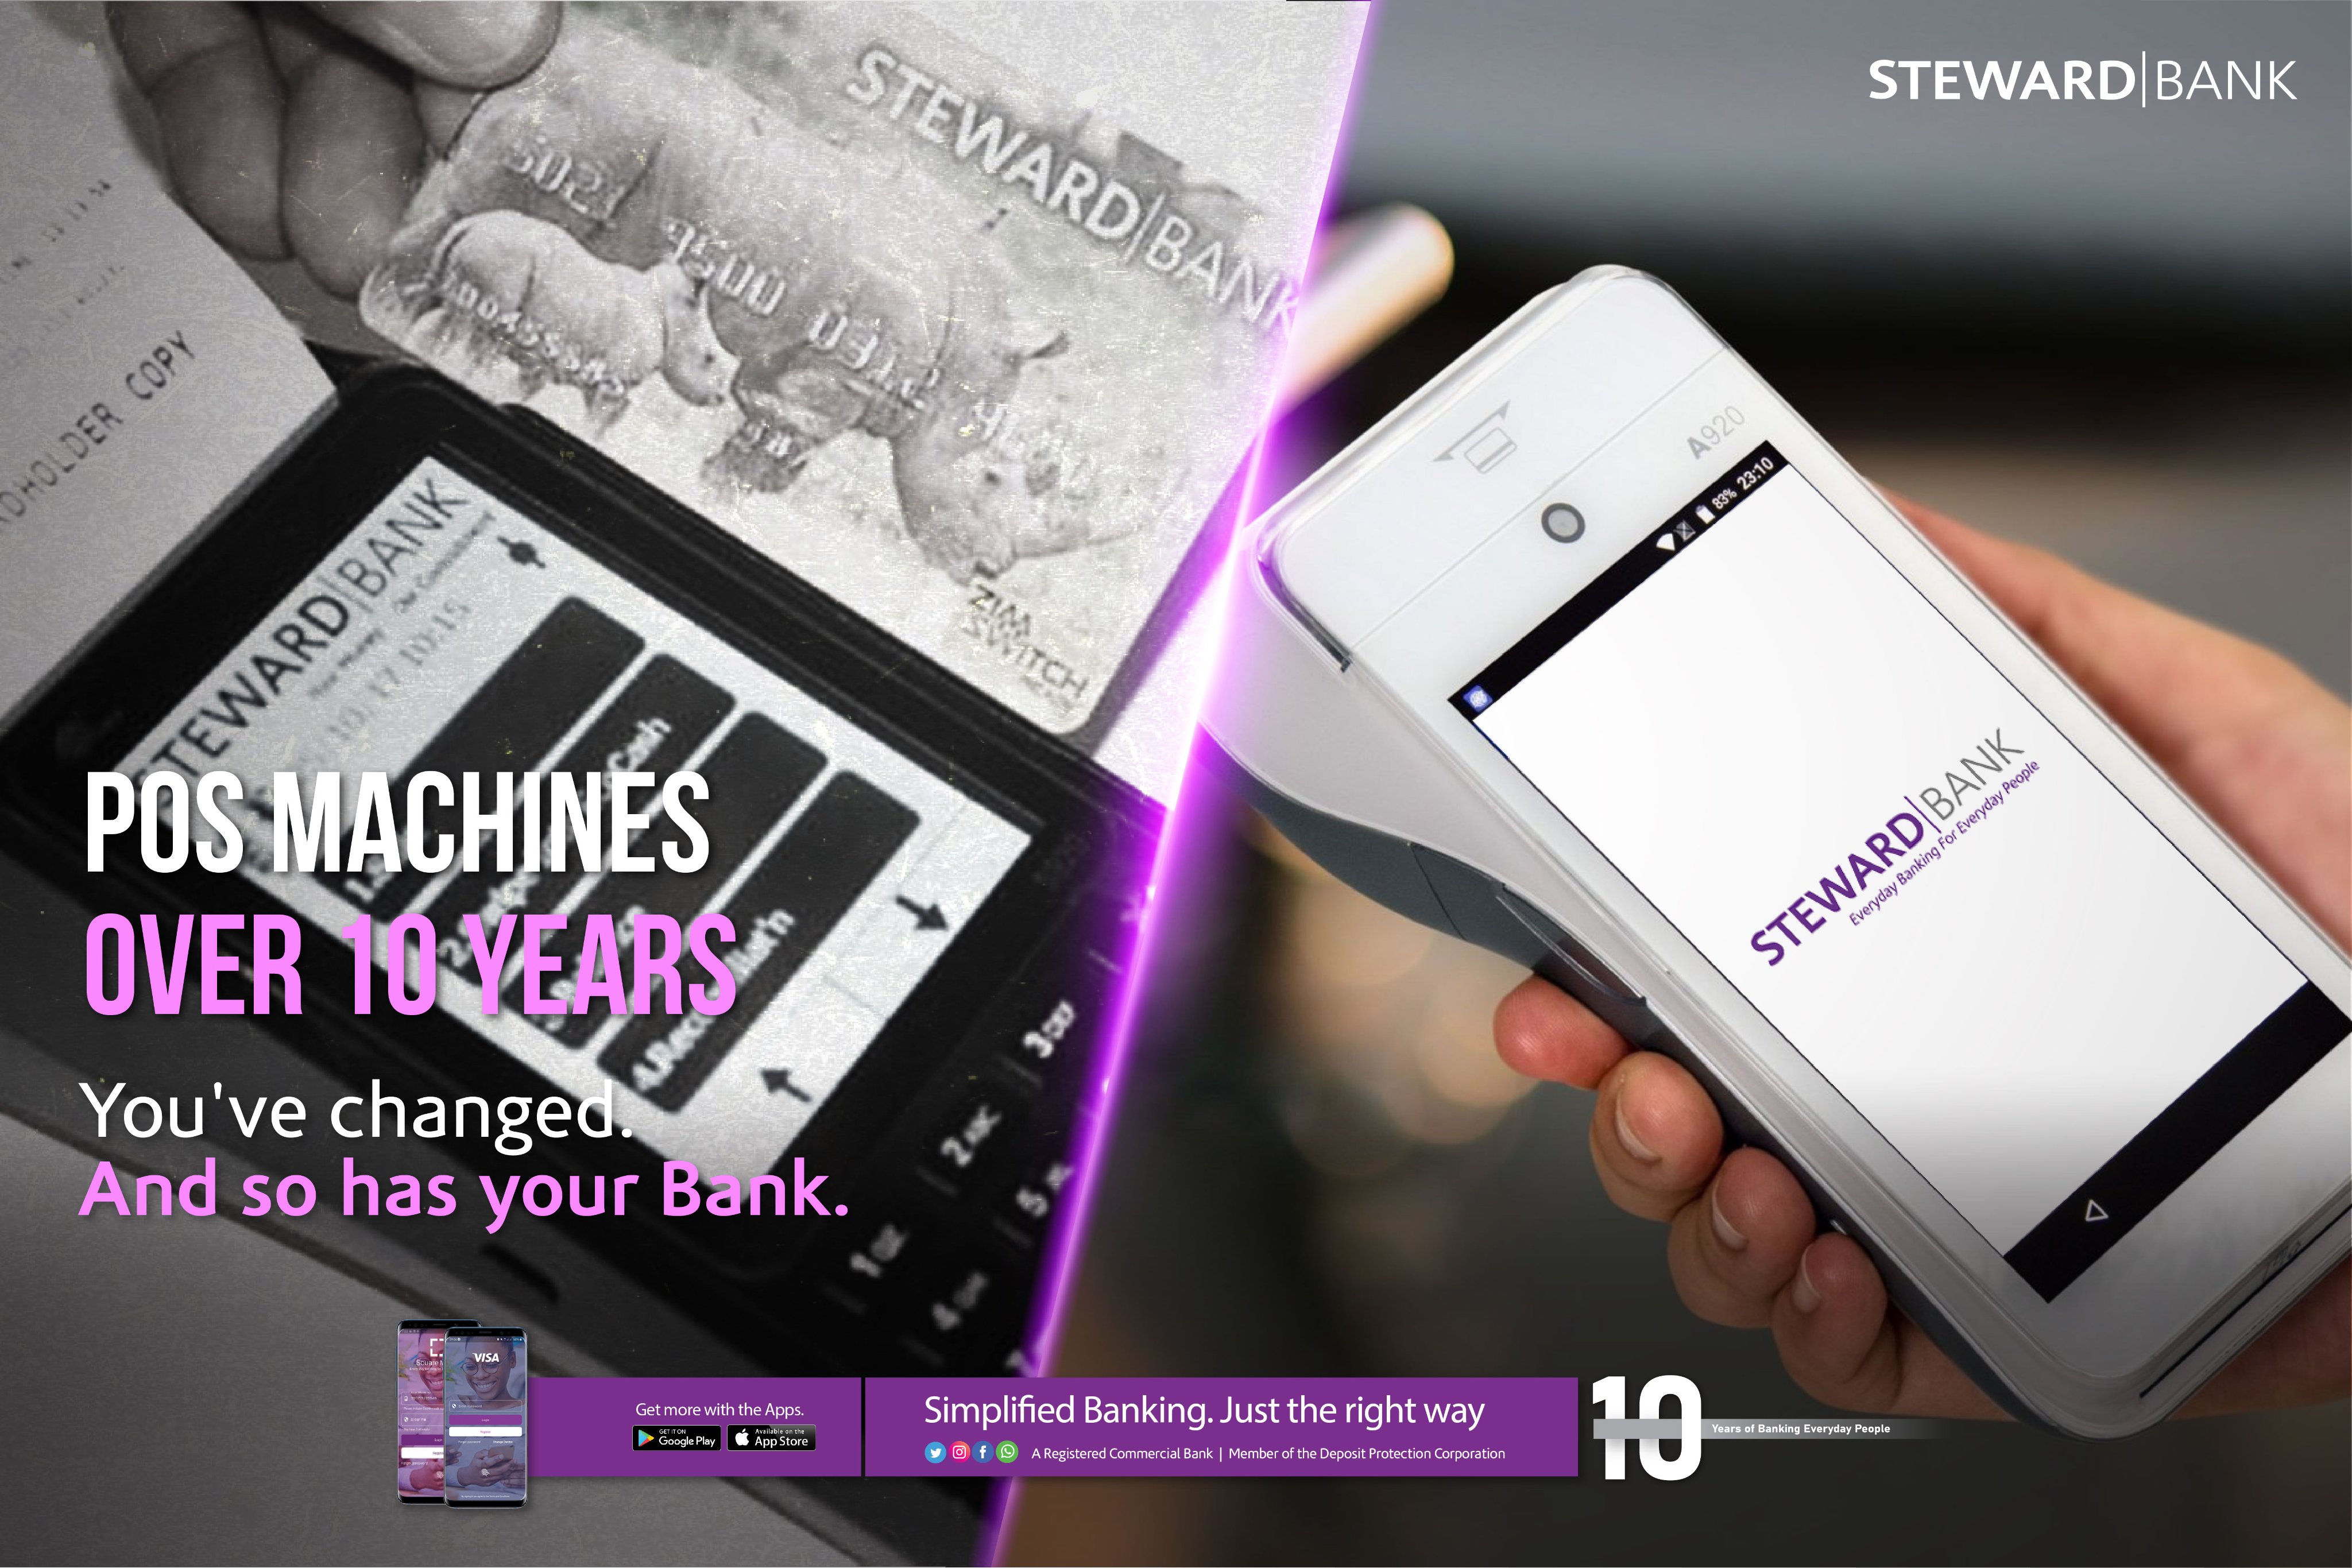 Steward Bank on X: "🙂Our POS machines, Then & Now! #StewardBankAt10 🟪We  have been innovating and improving our POS machines incorporating the  latest technologies and features to meet your needs. #SimplifiedBanking  https://t.co/78weCzjzjR" /